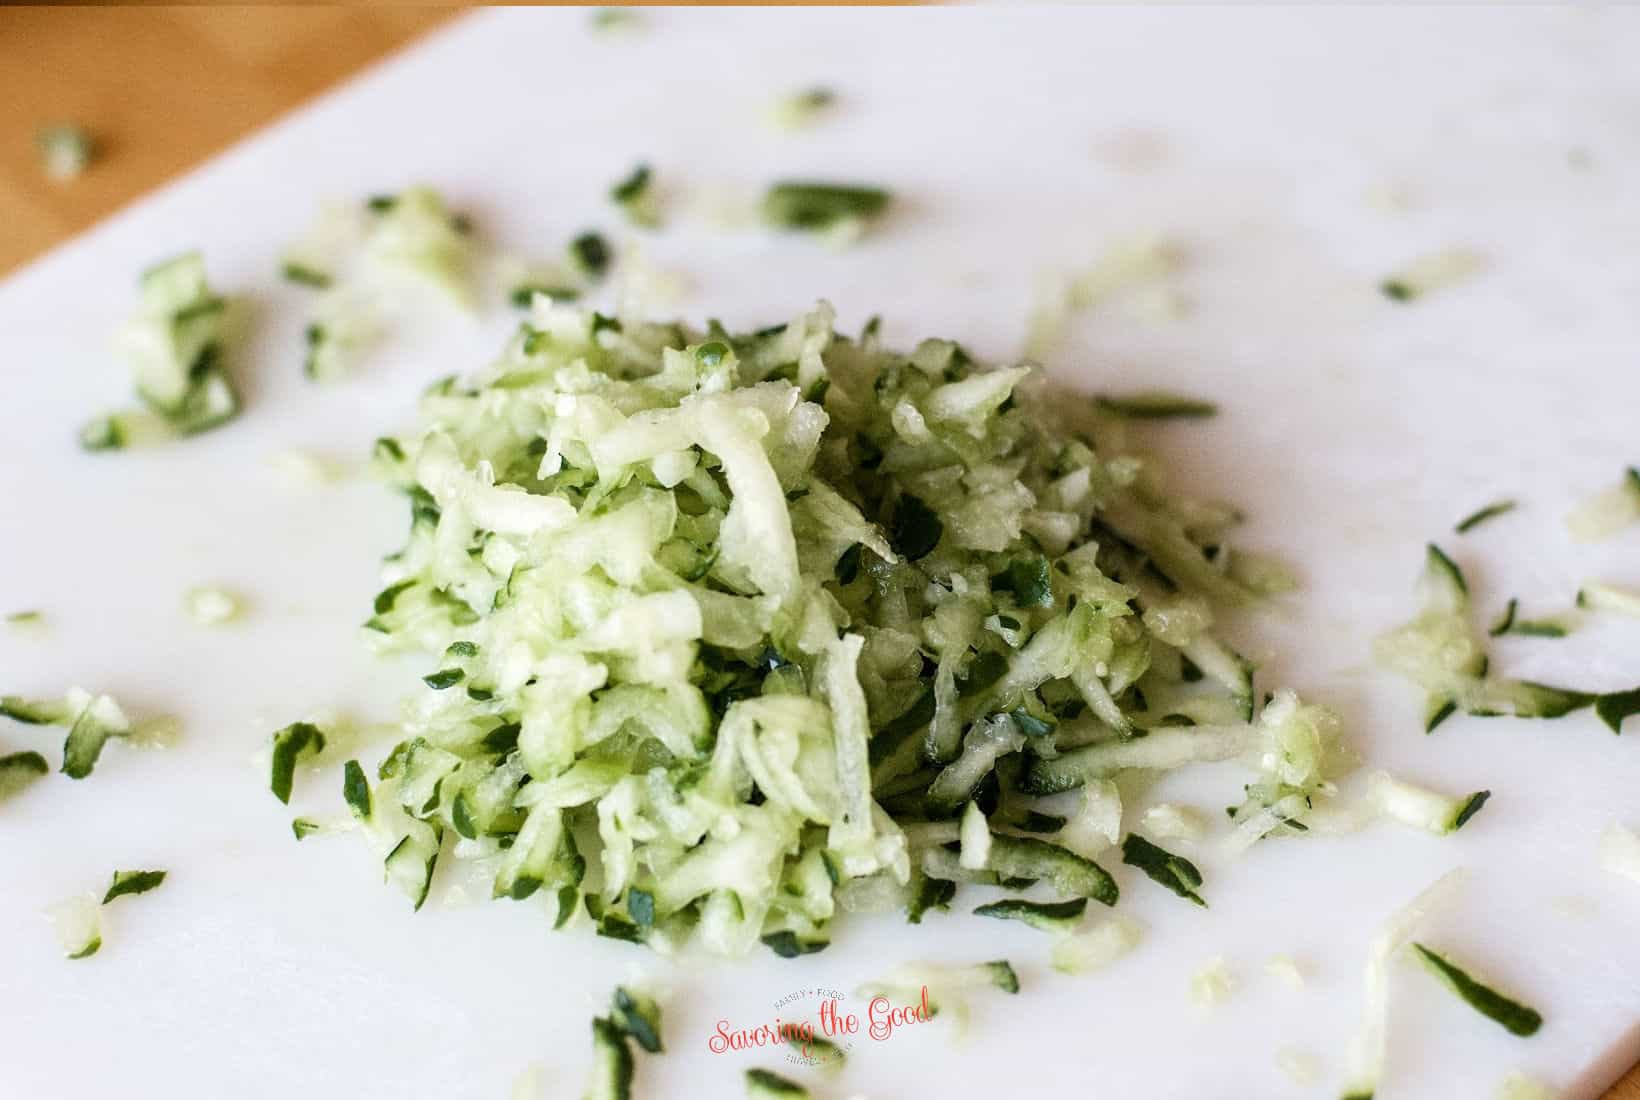 grated-cucumber-with-salt-sprinkled-over-it